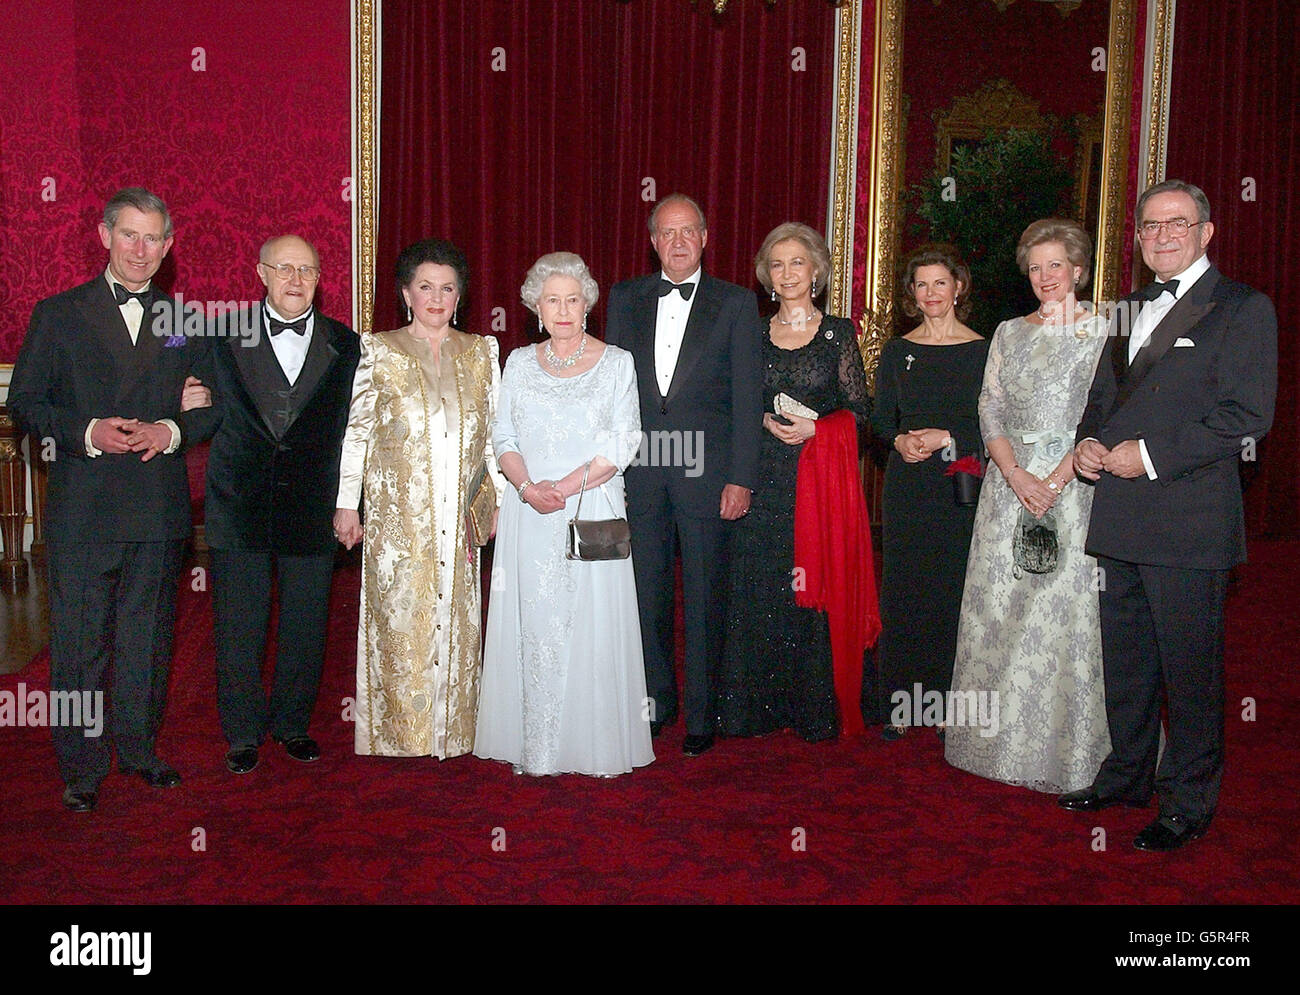 (l/r) The Prince of Wales, Mstilav Rostropovich, Mrs Rostropovich, Britain's Queen Elizabeth II, King Juan Carlos of Spain, Queen Sofia of Spain, Queen Silvia of Sweden, Queen Anne-Marie of Greece and King Constantine of Greece at a reception at Buckingham Palace. * prior to a concert. Stock Photo